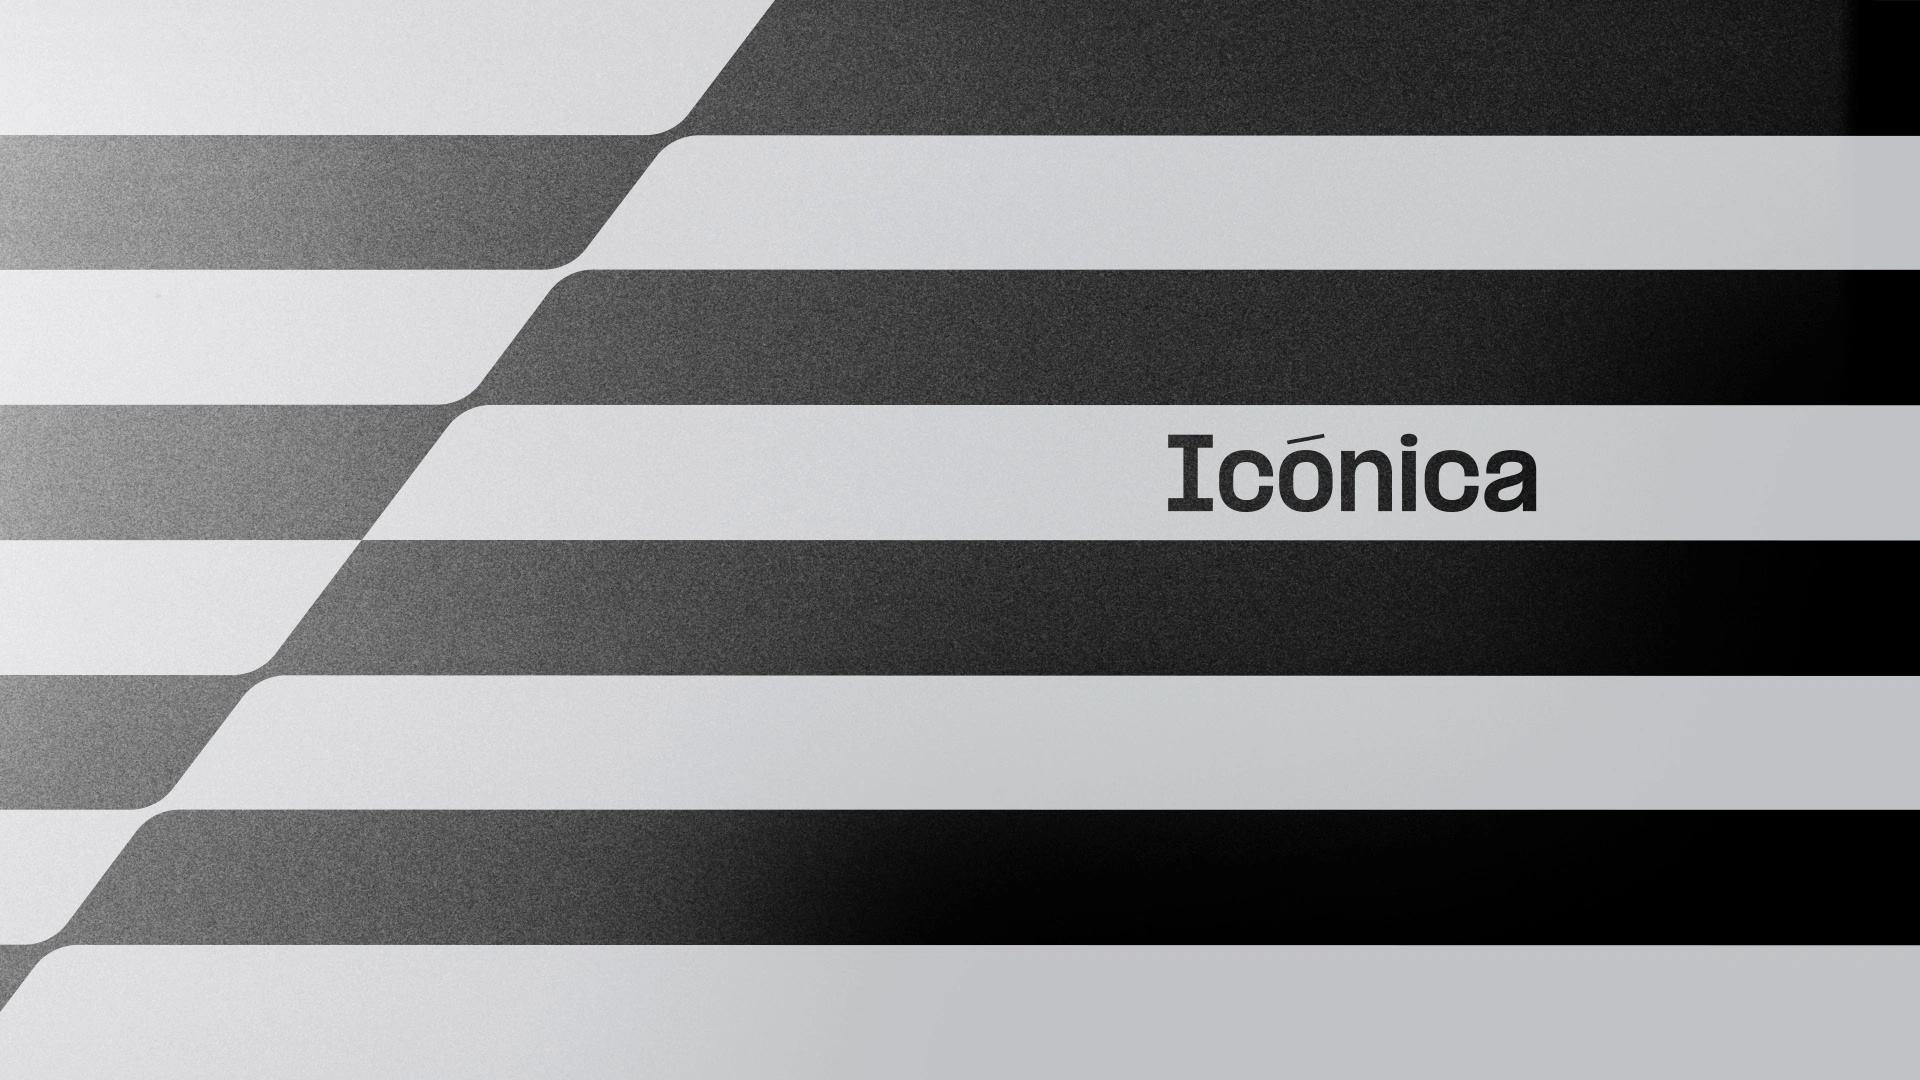 Image taken from the FAMEL motion video. Graphic composition with the wording "Iconic" in it.